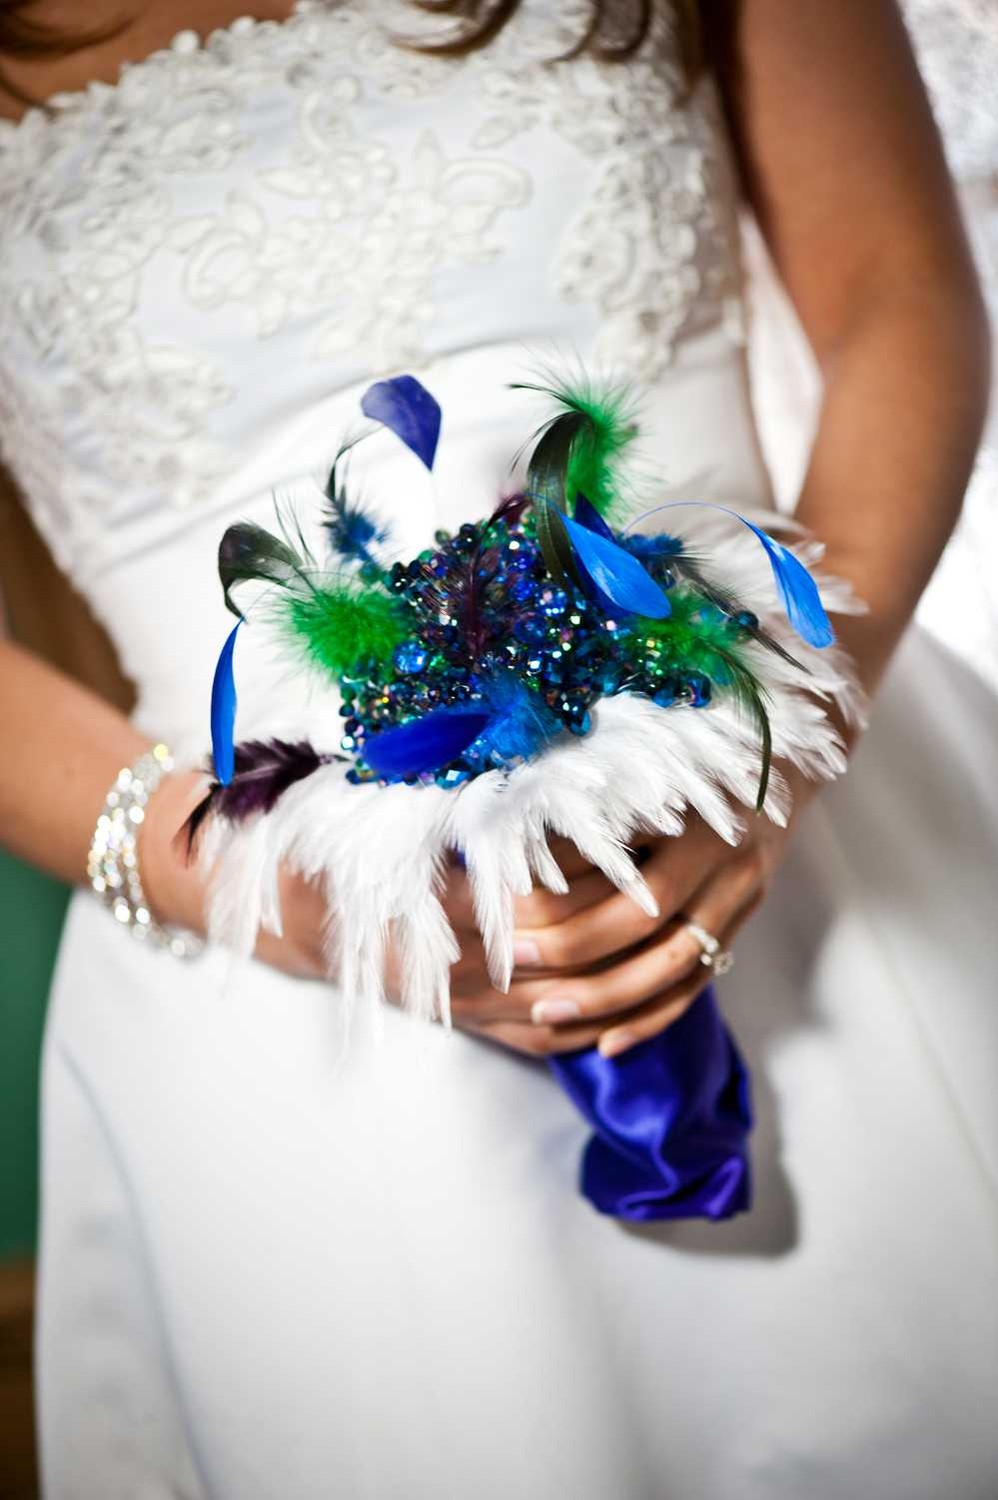 Crystal, Pearl, Brooch Or Feather Wedding Bouquets And Accessories - Deposit And Ordering Information